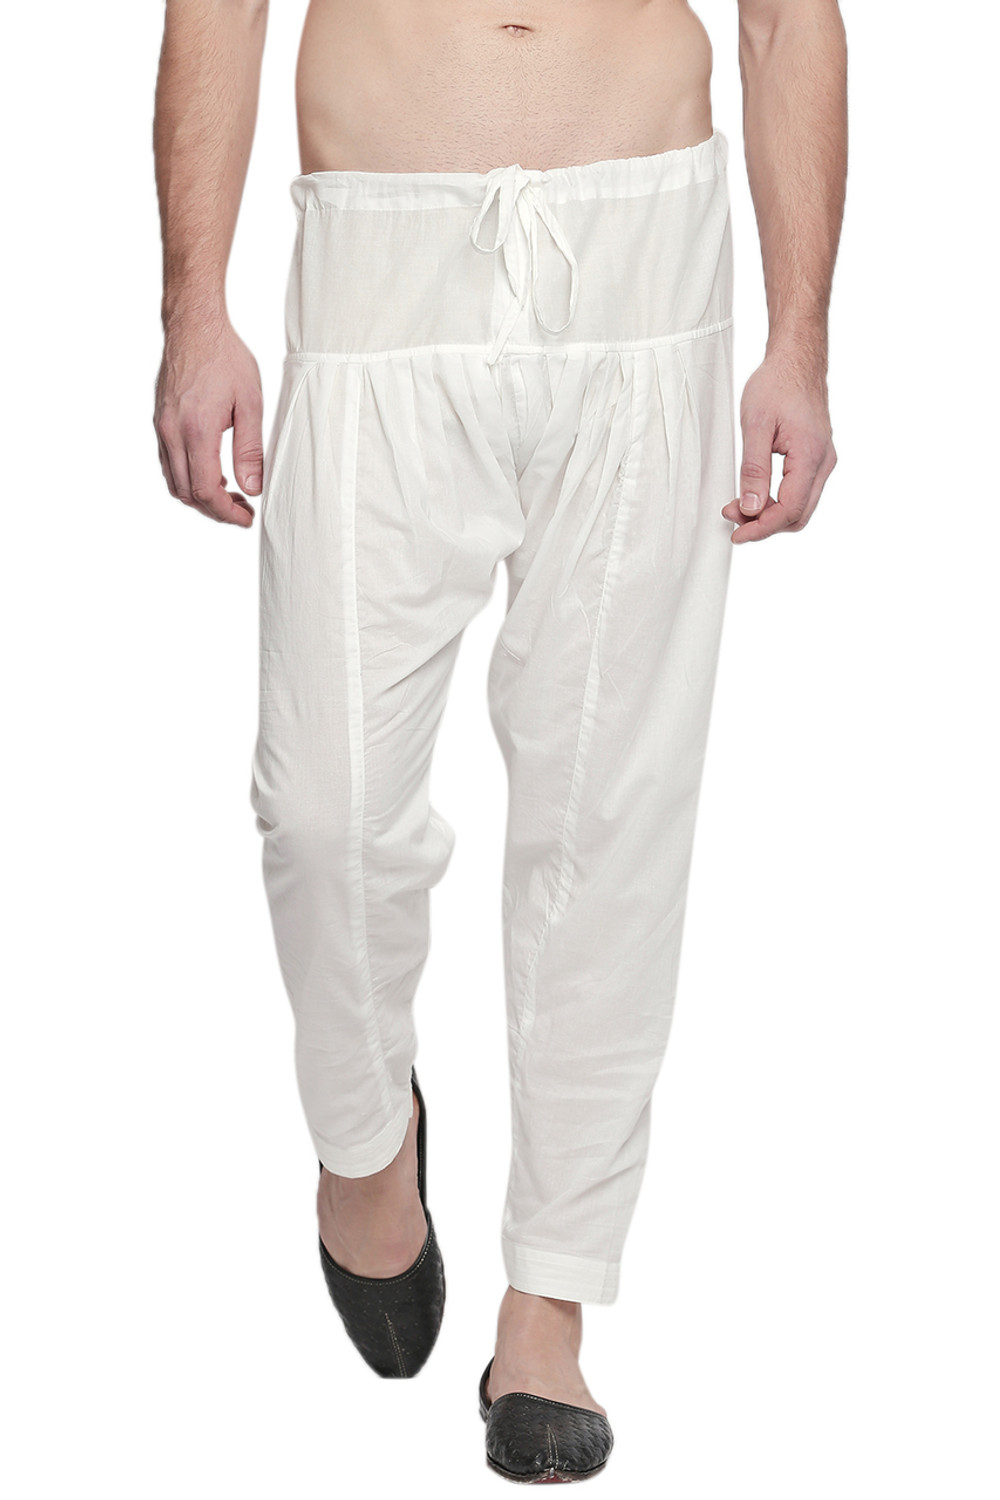 Men's Indian Style Pants: White Traditional Indian Baggy Pants